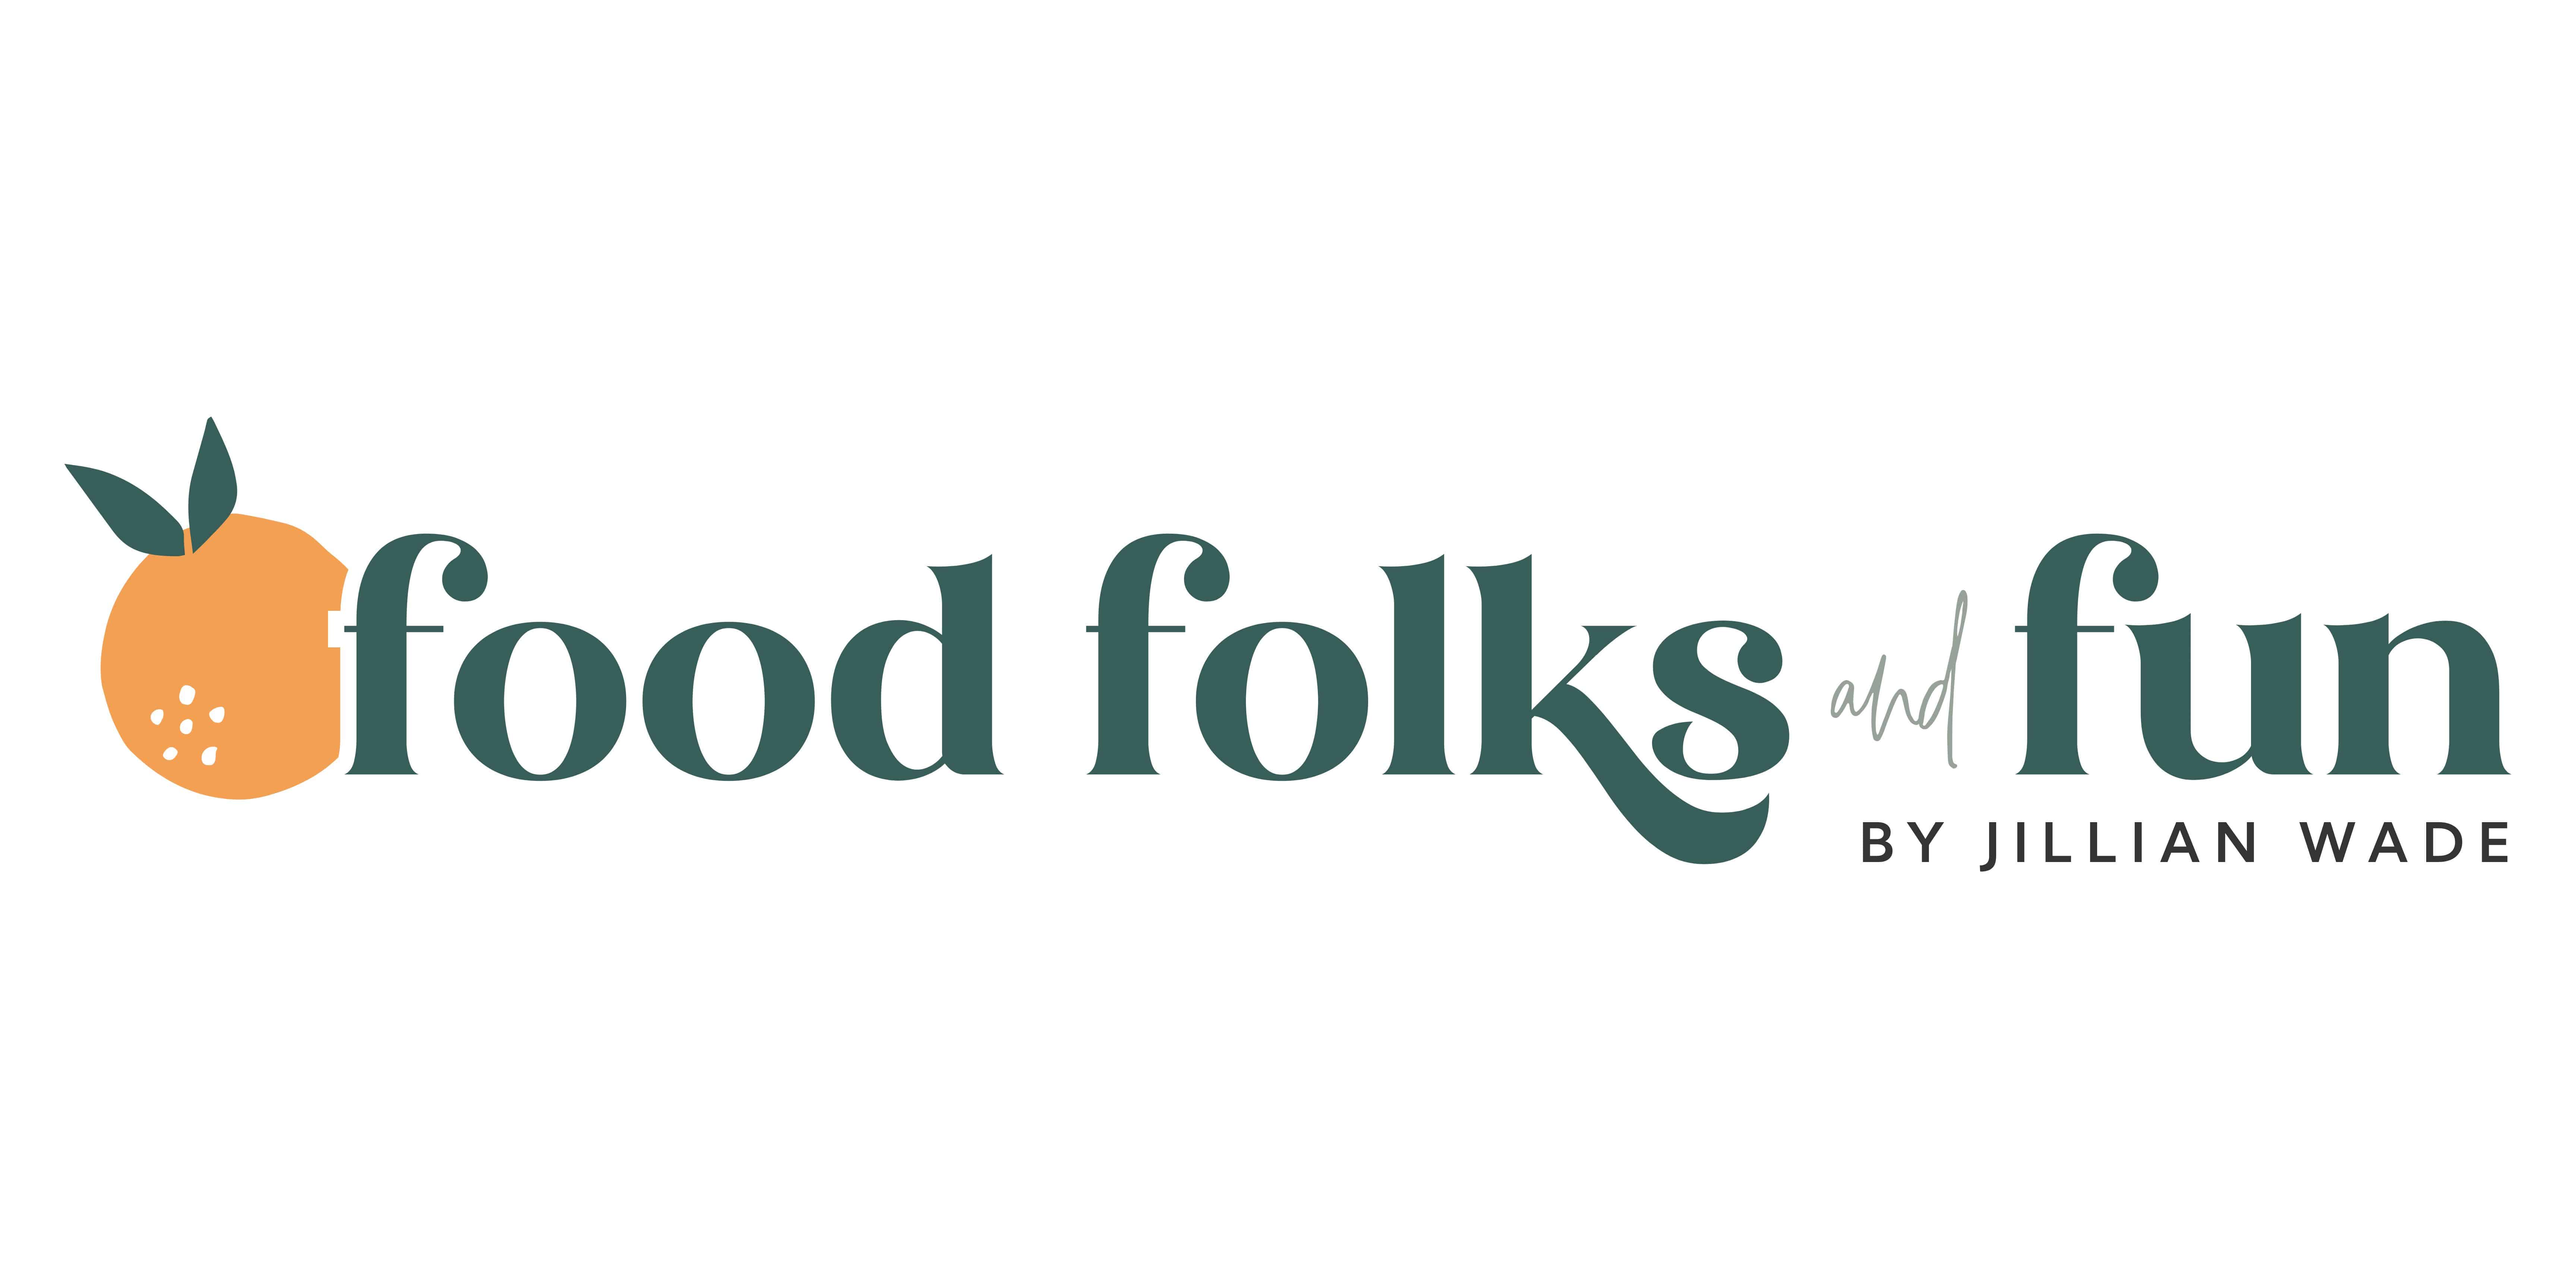 Food, Folks and Fun logo with a yellow lemon image on the left.